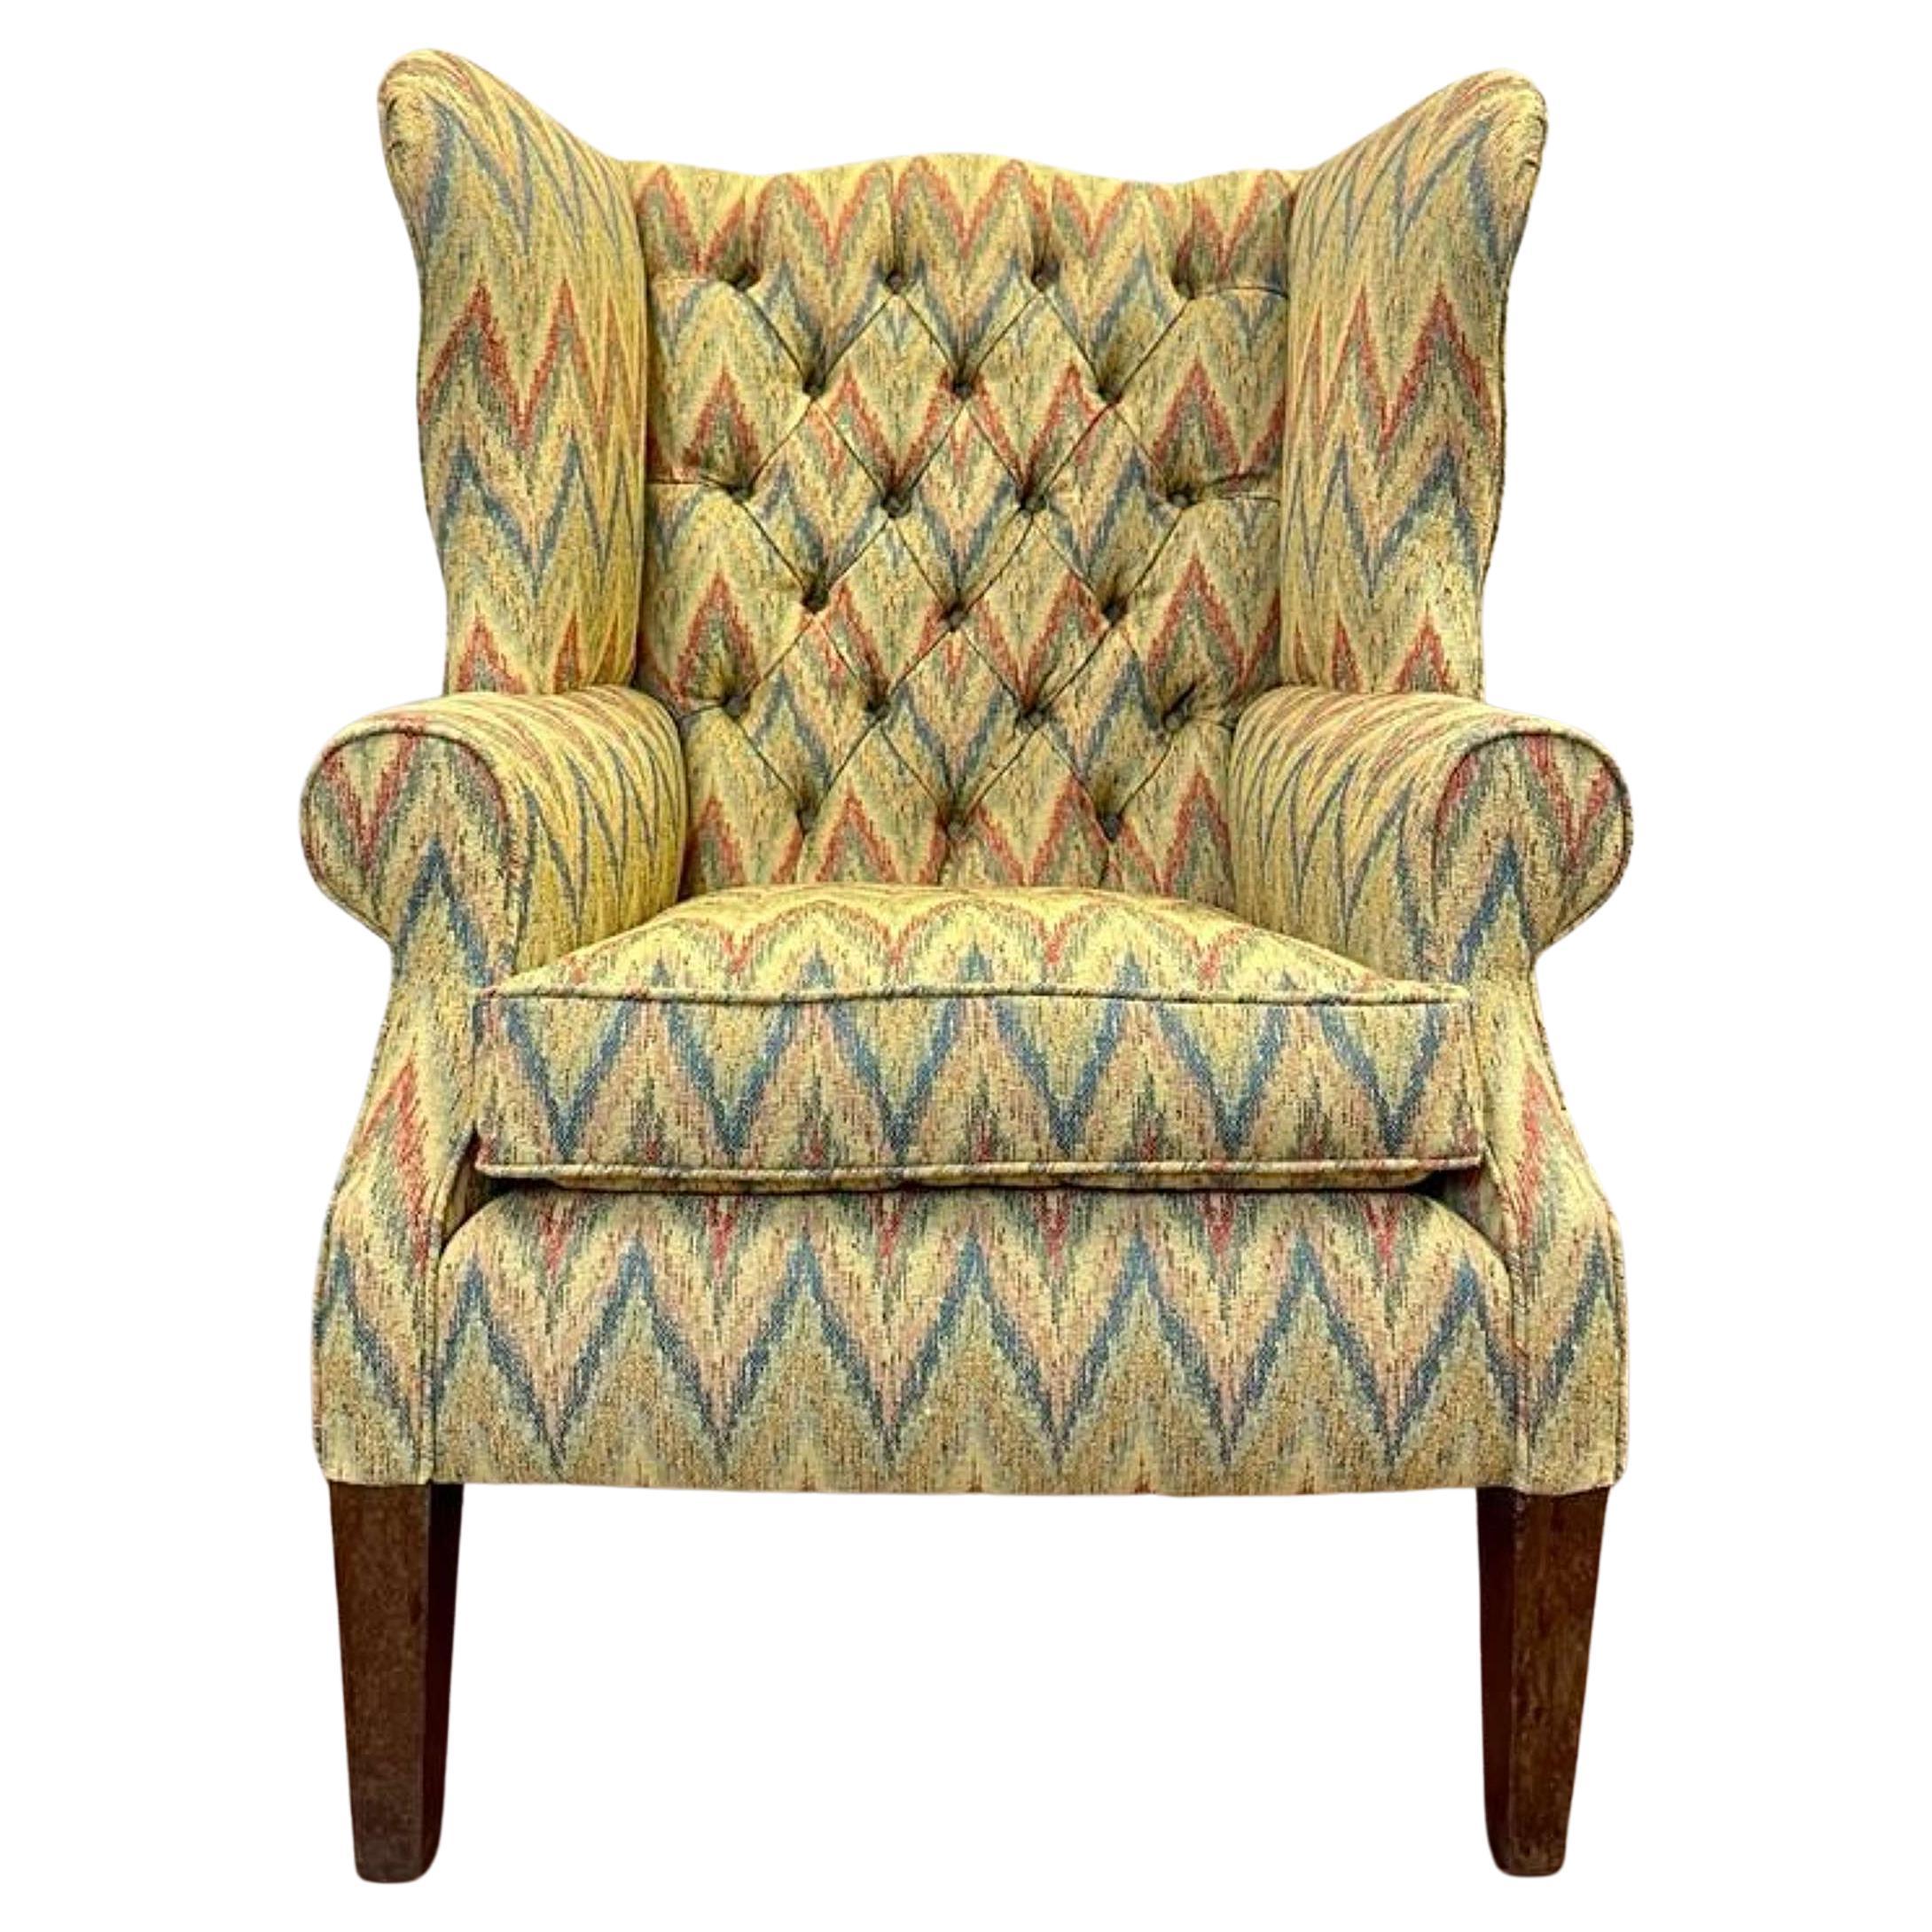 English 19th Century Wingback Chair in Missoni Style Fabric